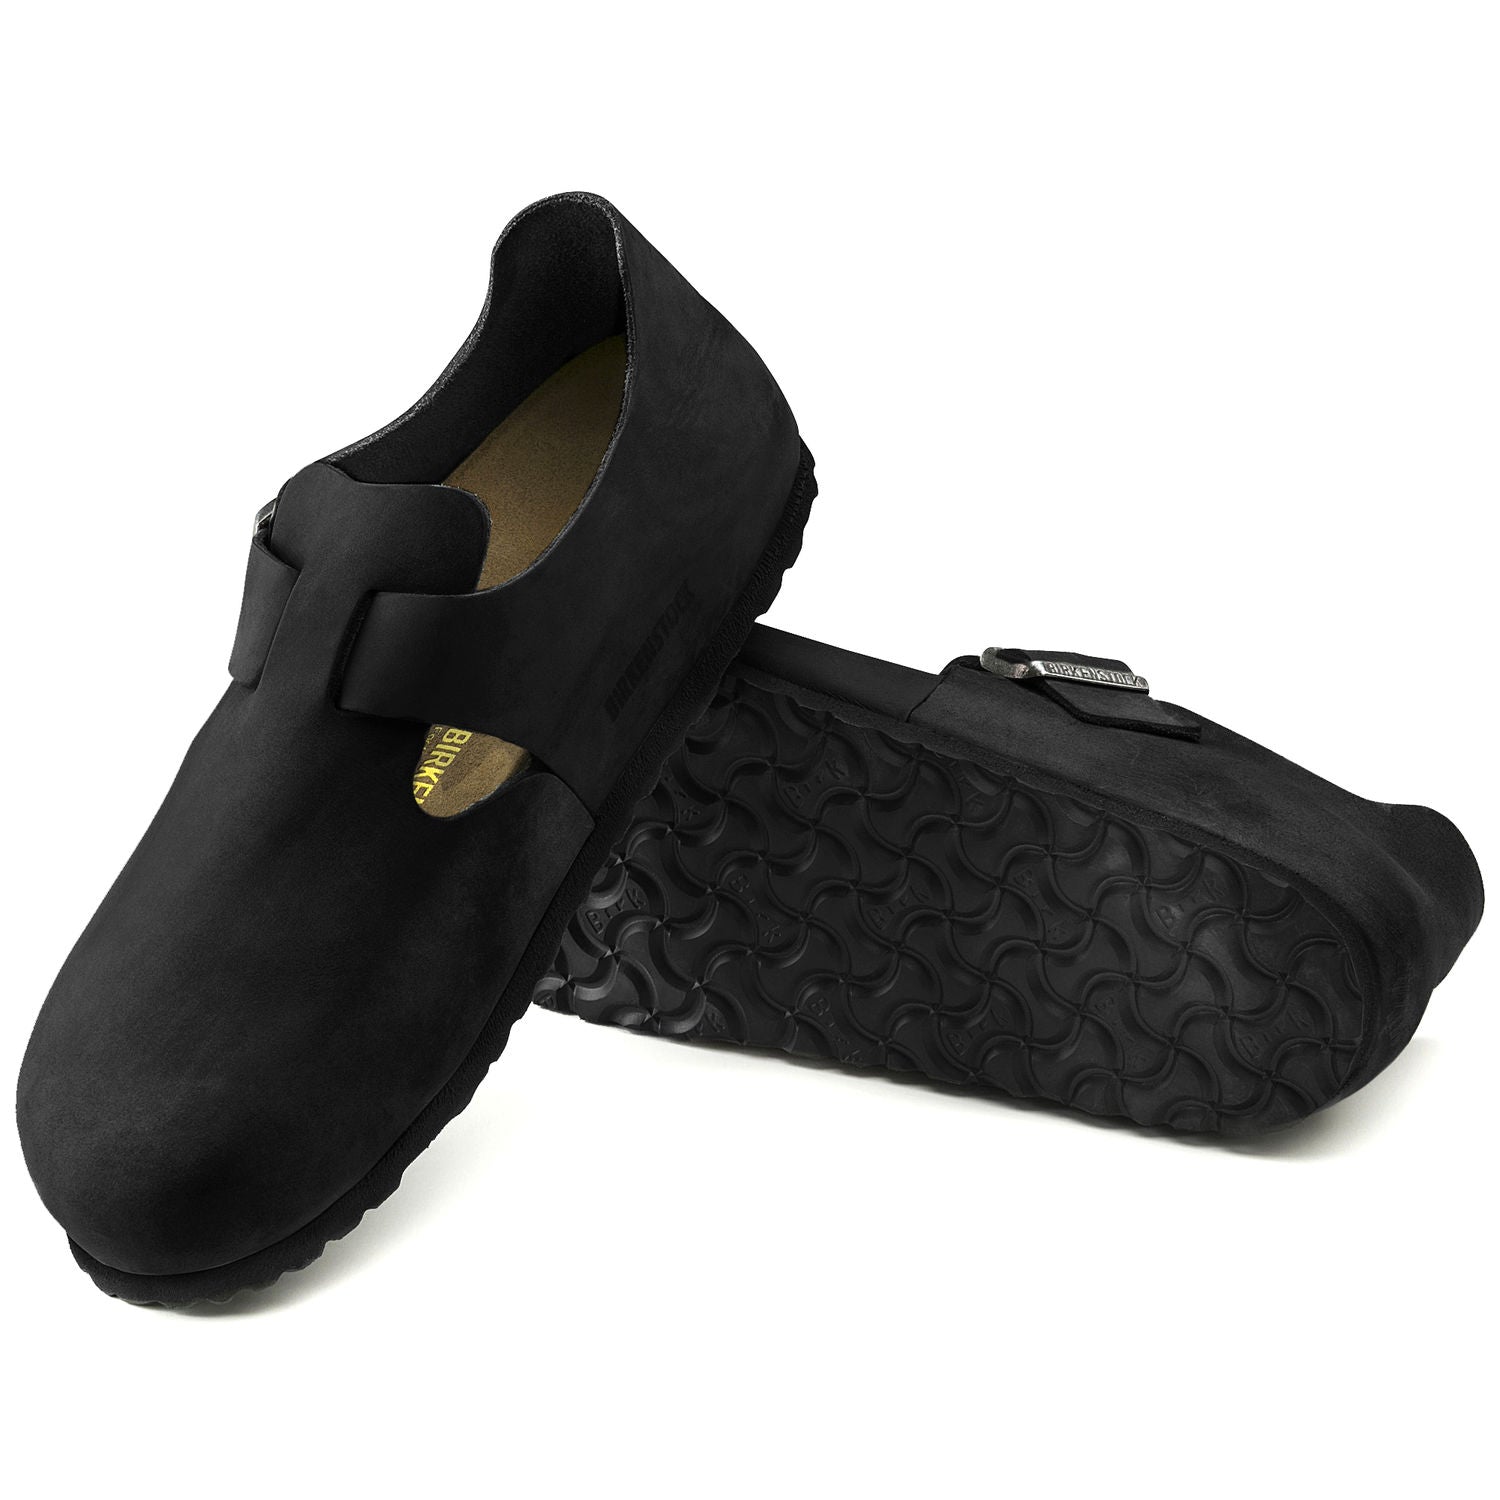 London Classic Footbed : Black Oiled